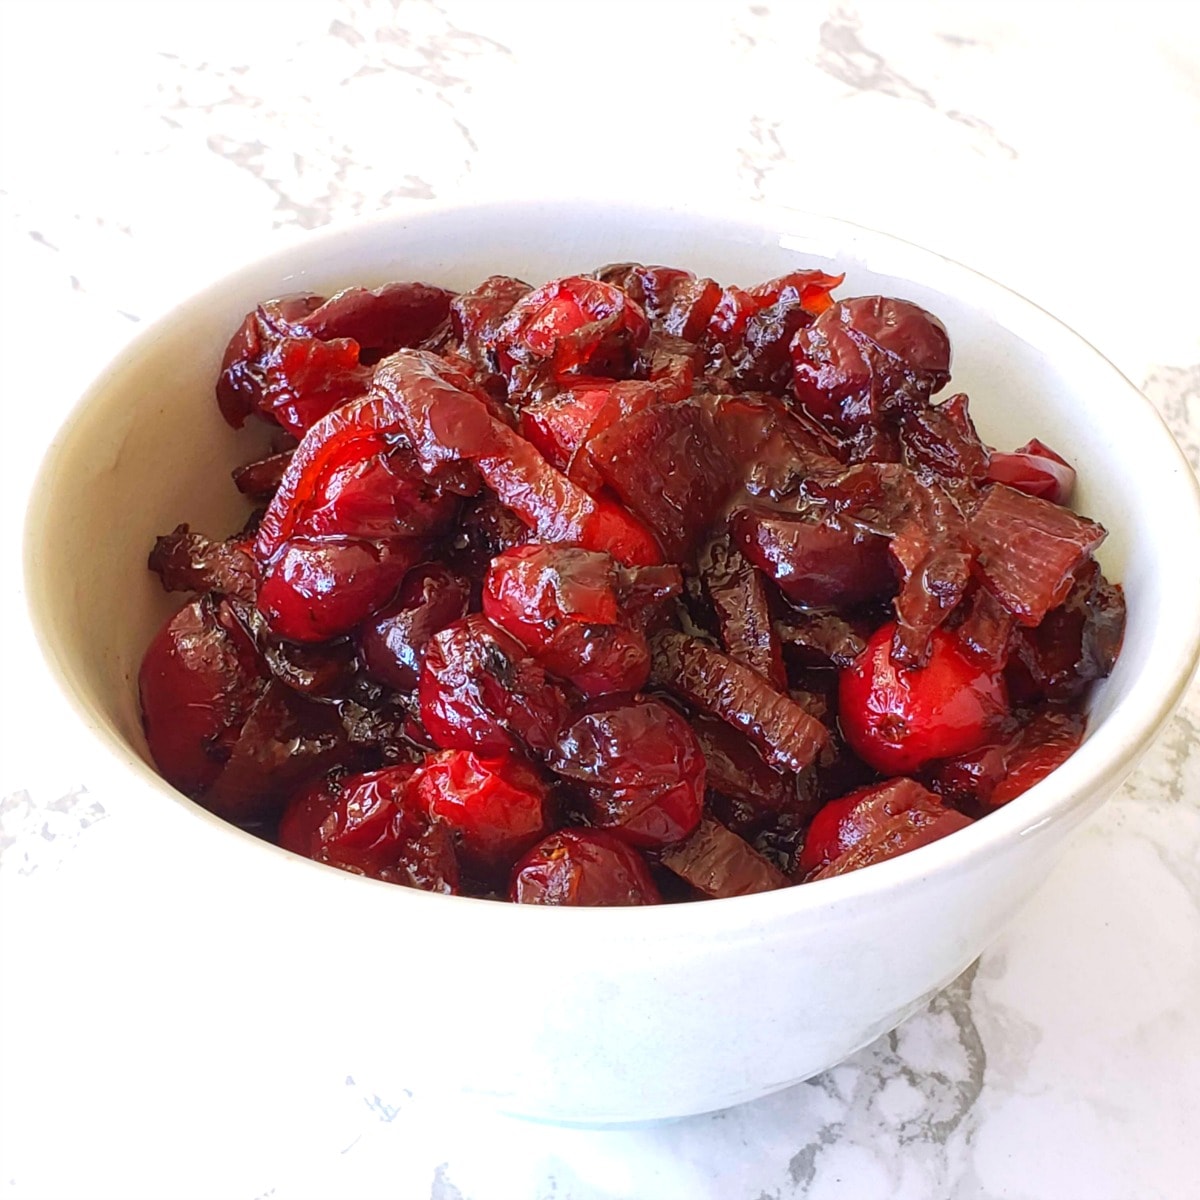 Cranberry Sauce with Caramelized Onions in a small bowl on a marble countertop